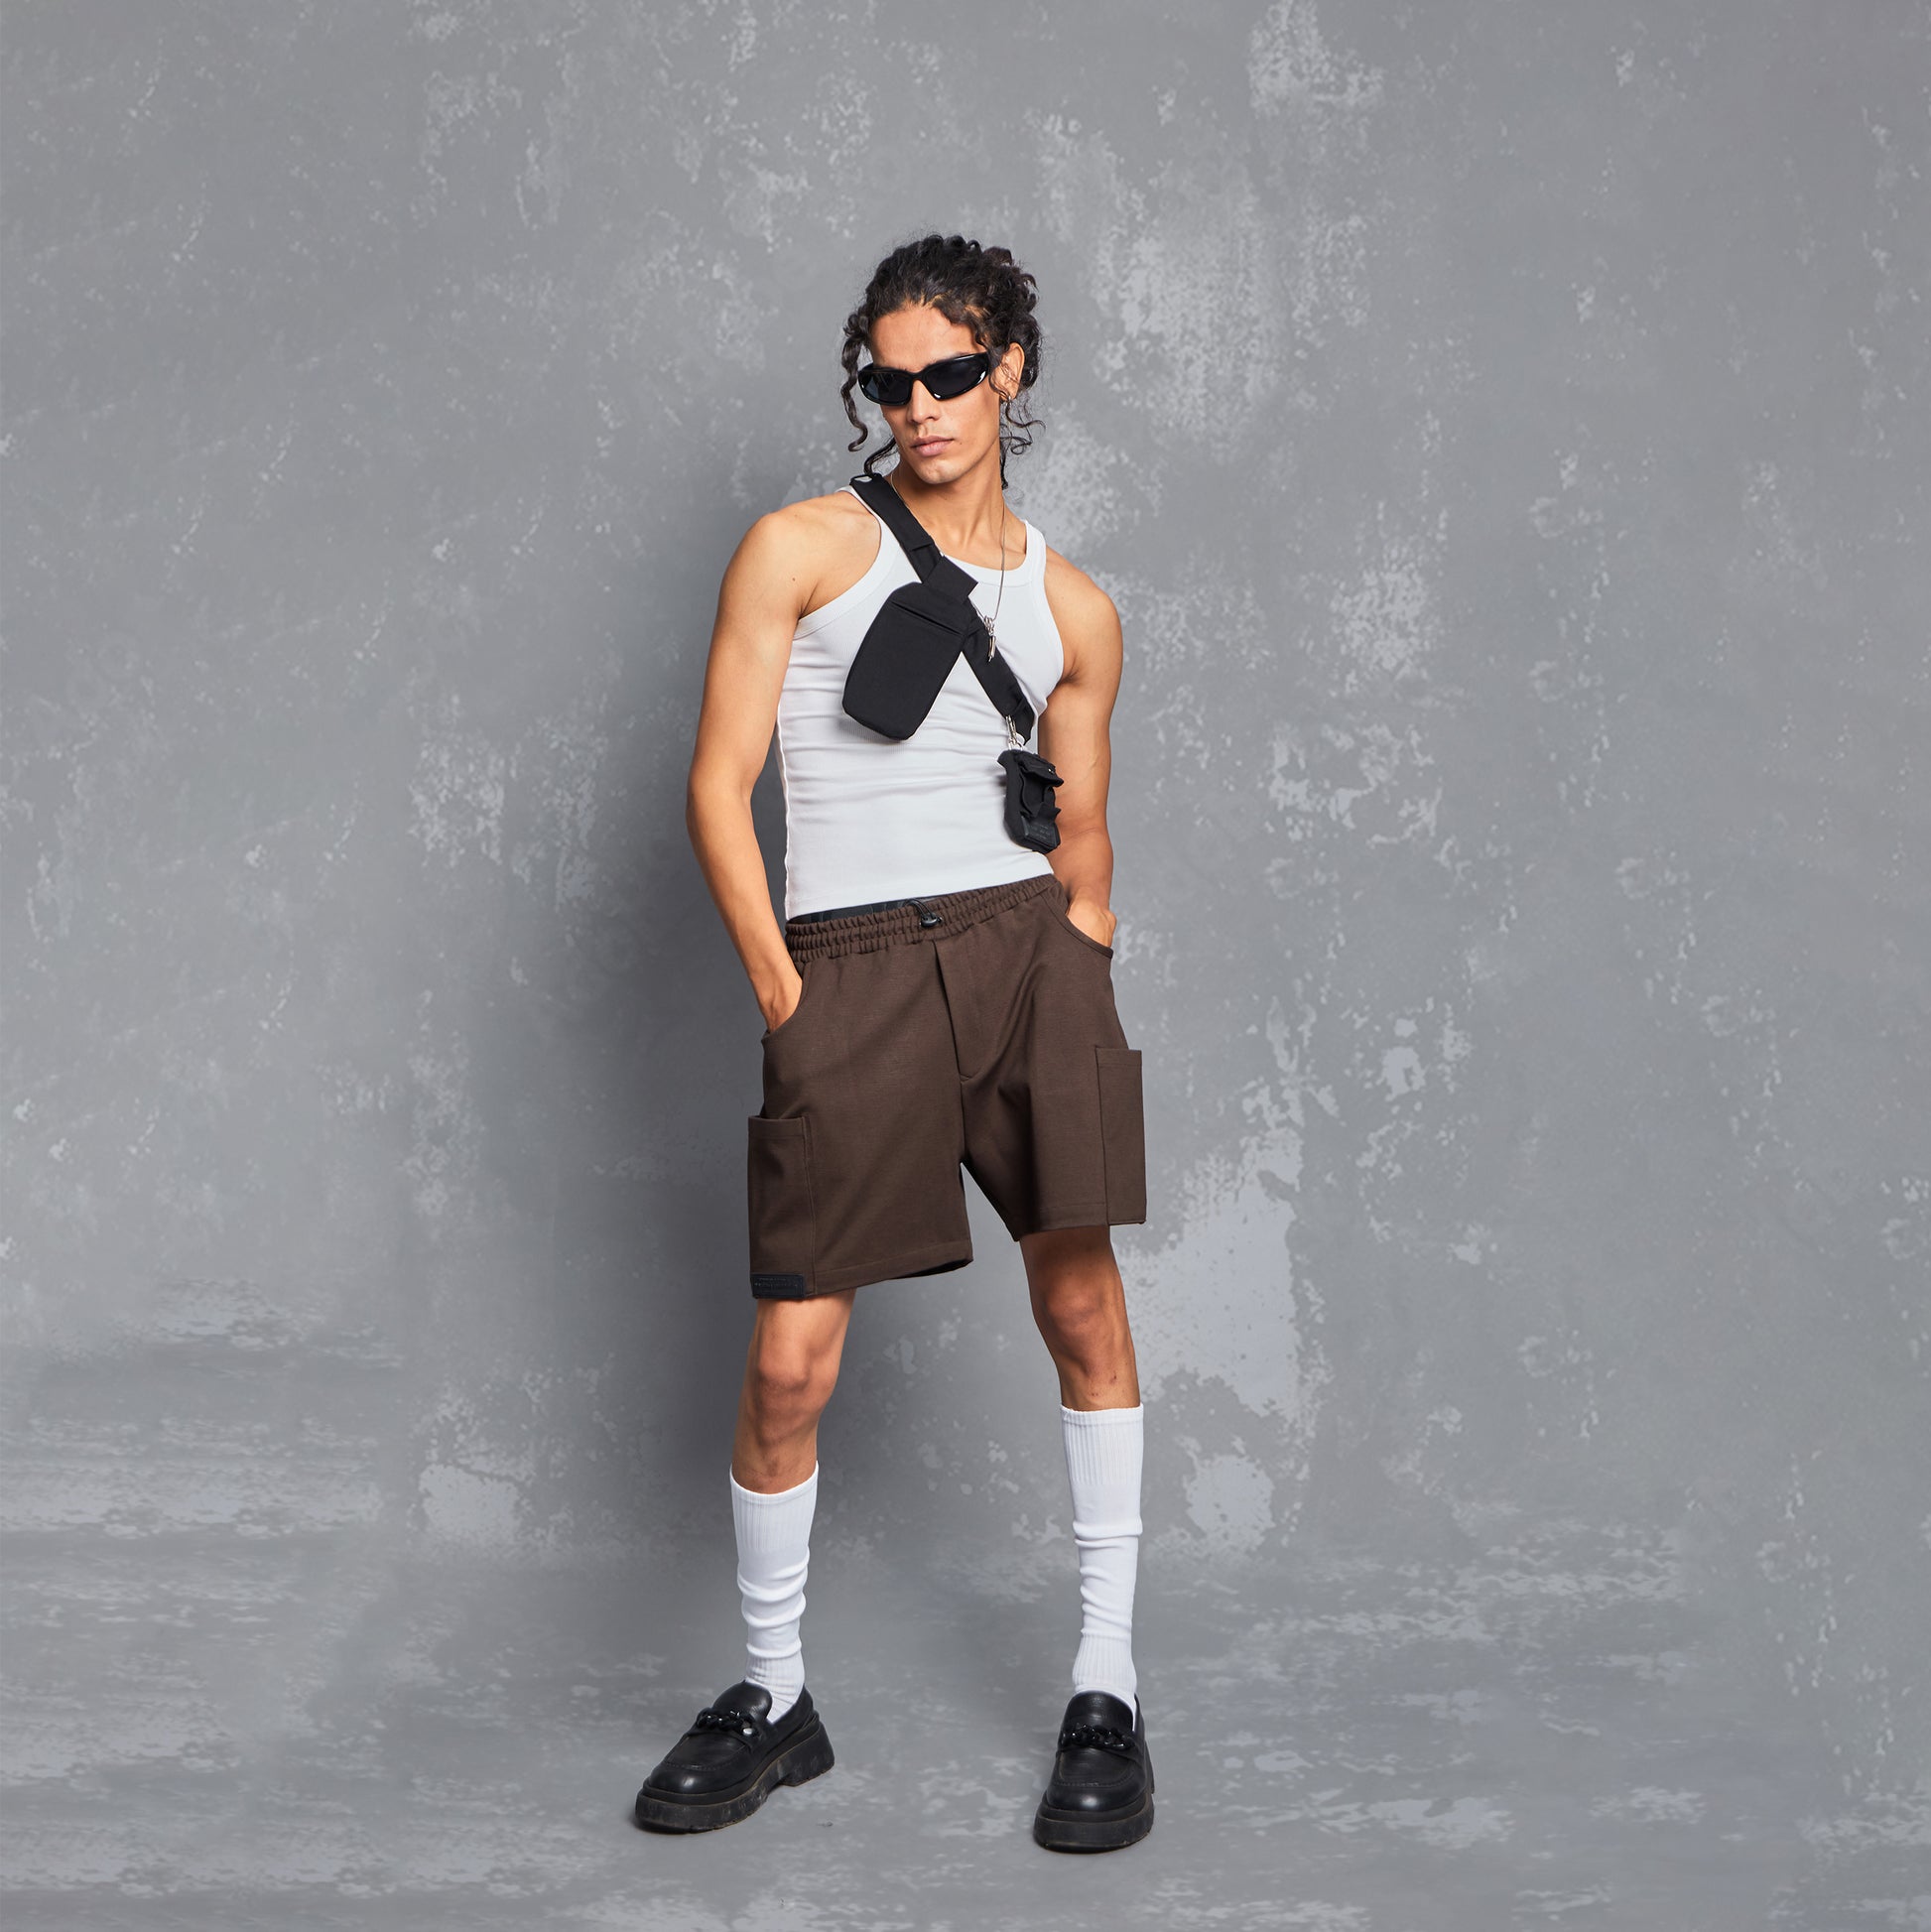 model, spring / summer 2023, warping theories, collection, lifestyle, smart casuals, brown shorts, men's shorts, every day outfit, styling inspiration, utility pocket, waistband, people also ask